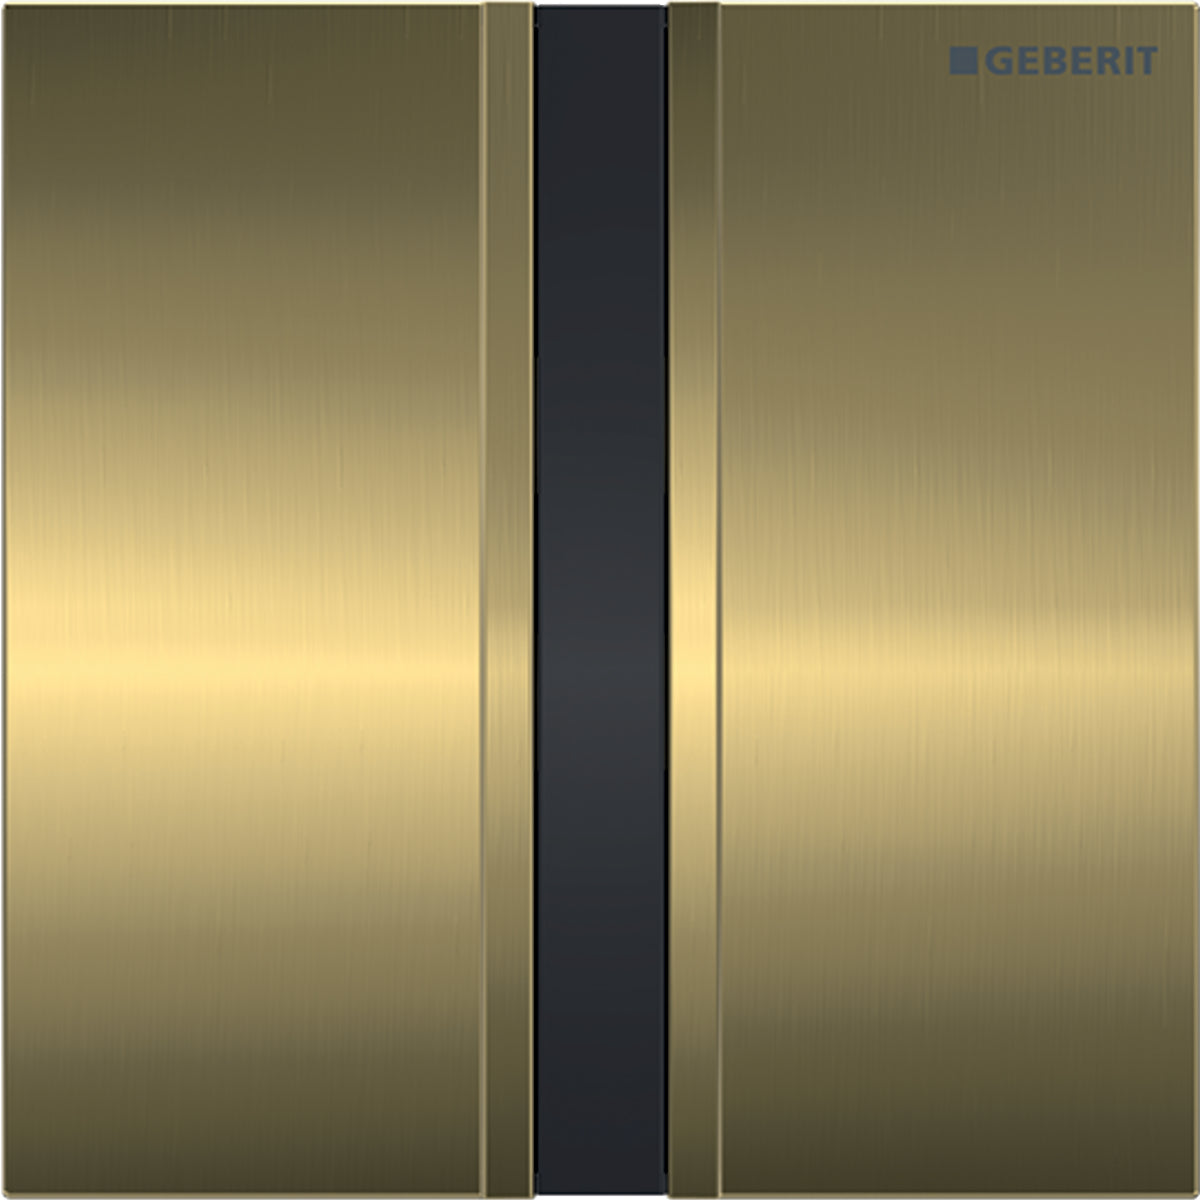 Geberit 116.026.QF.1- Geberit urinal flush control with electronic flush actuation, mains operation, cover plate type 50: brass / brushed, easy-to-clean coated - FaucetExpress.ca